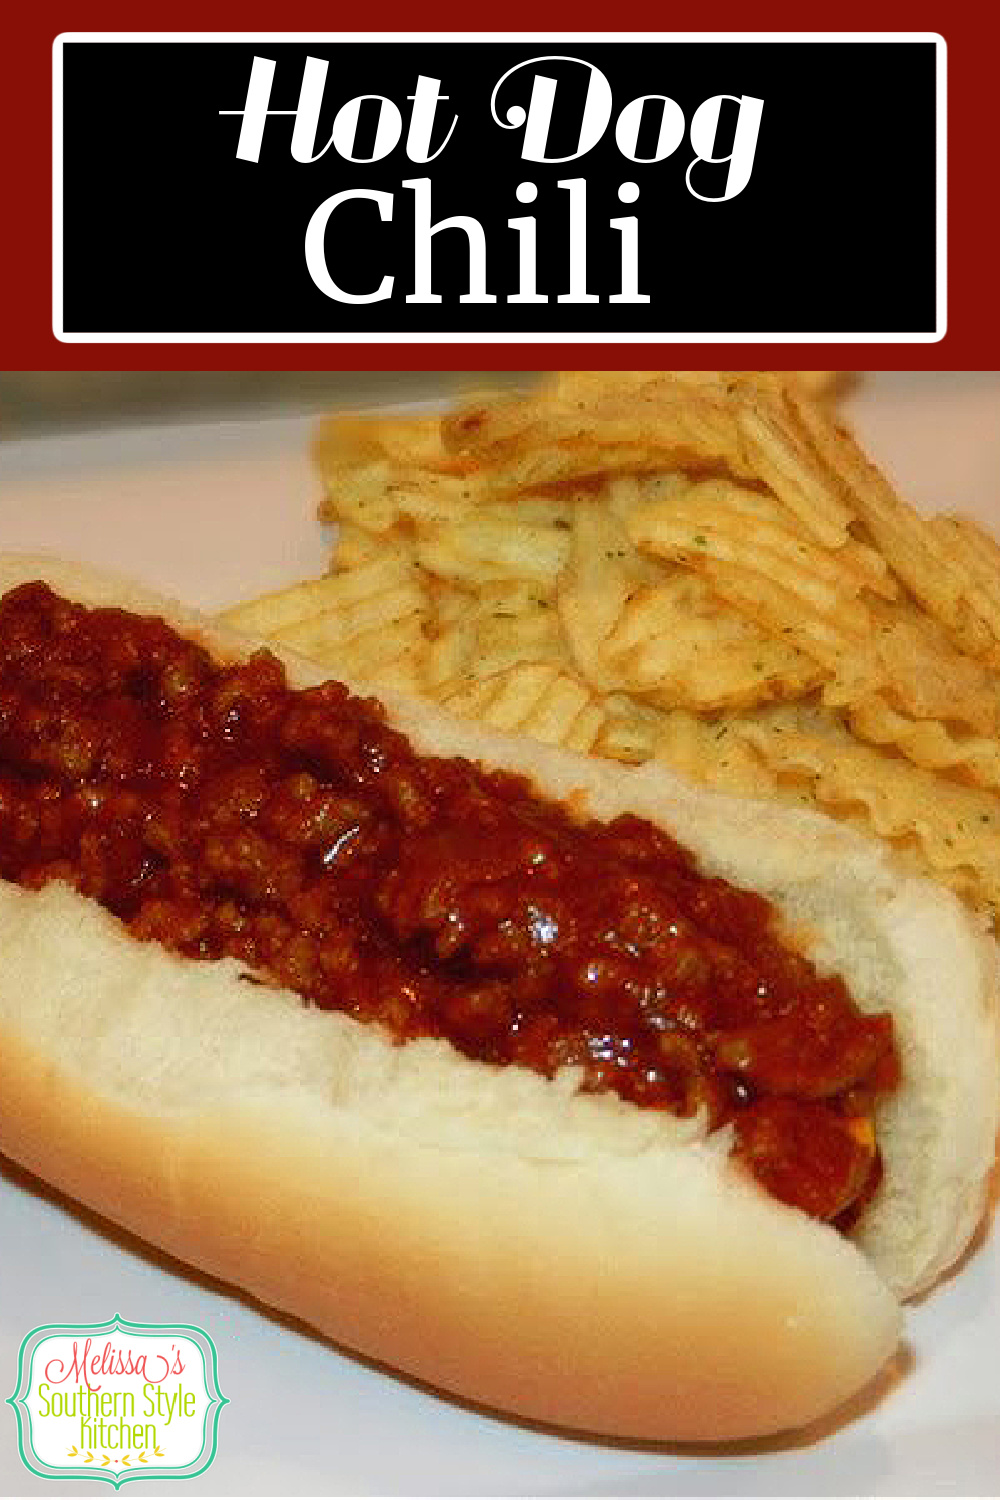 Homestyle Hot Dog Chili for cookouts and tailgating is the perfect topping for your hot dogs and grilled sausages #chili #hotdogchili #chilisauce #grilled #hotdogs #homestylechili #dinner #dinnerideas #food #recipes #southernfood #southernrecipes via @melissasssk